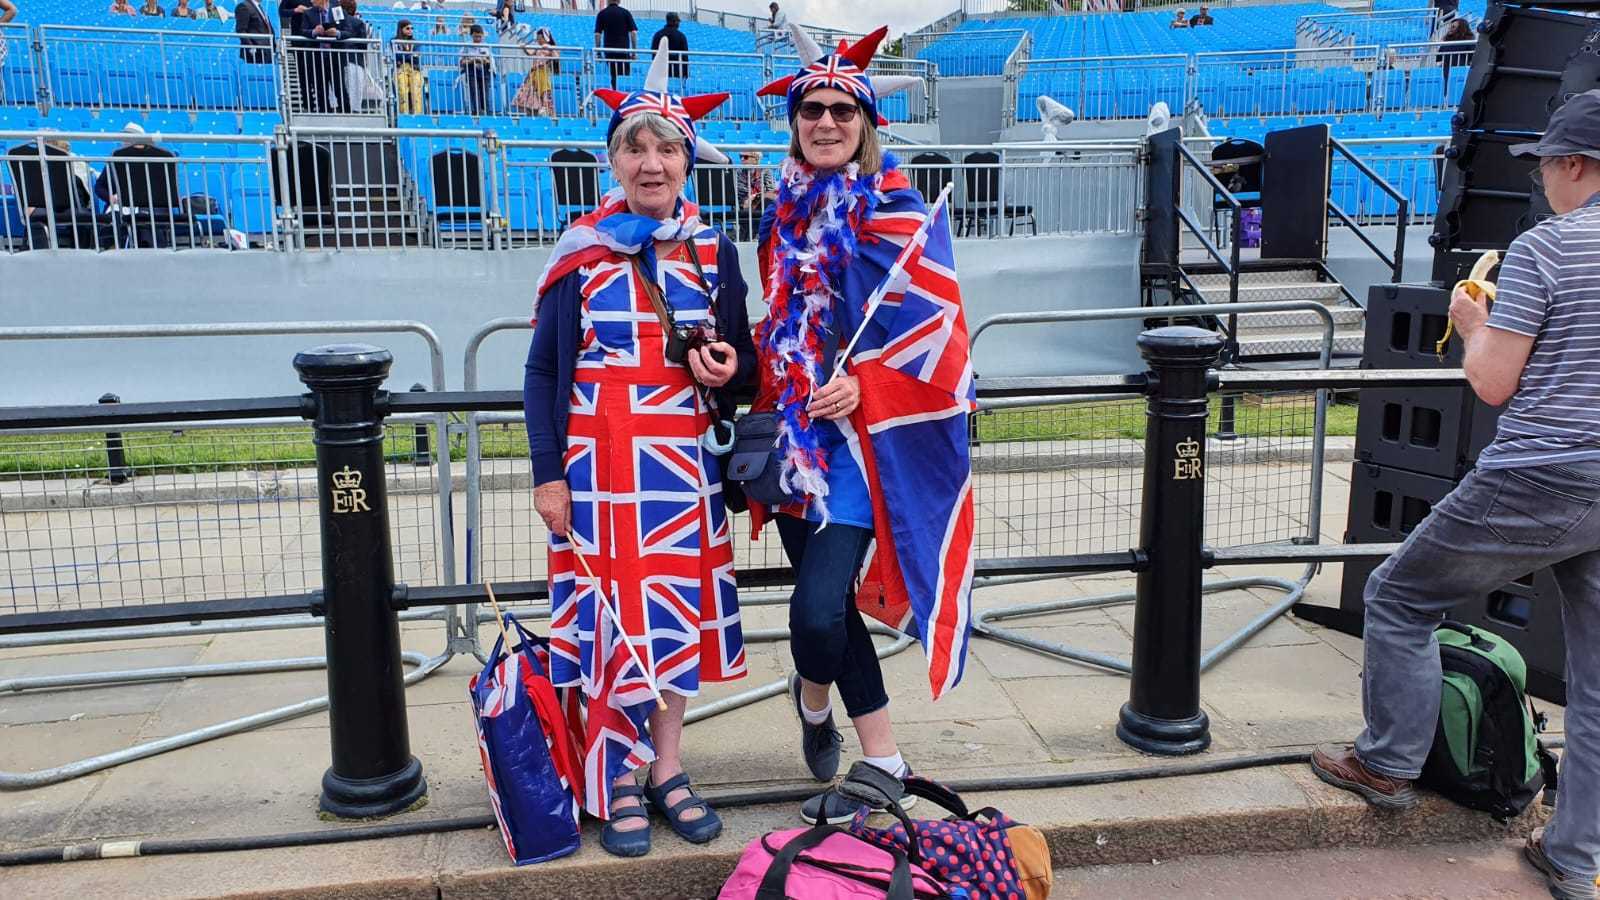 Moira Smith and Sally Conway photographed near The Mall in full Union Jack attire on June 2.